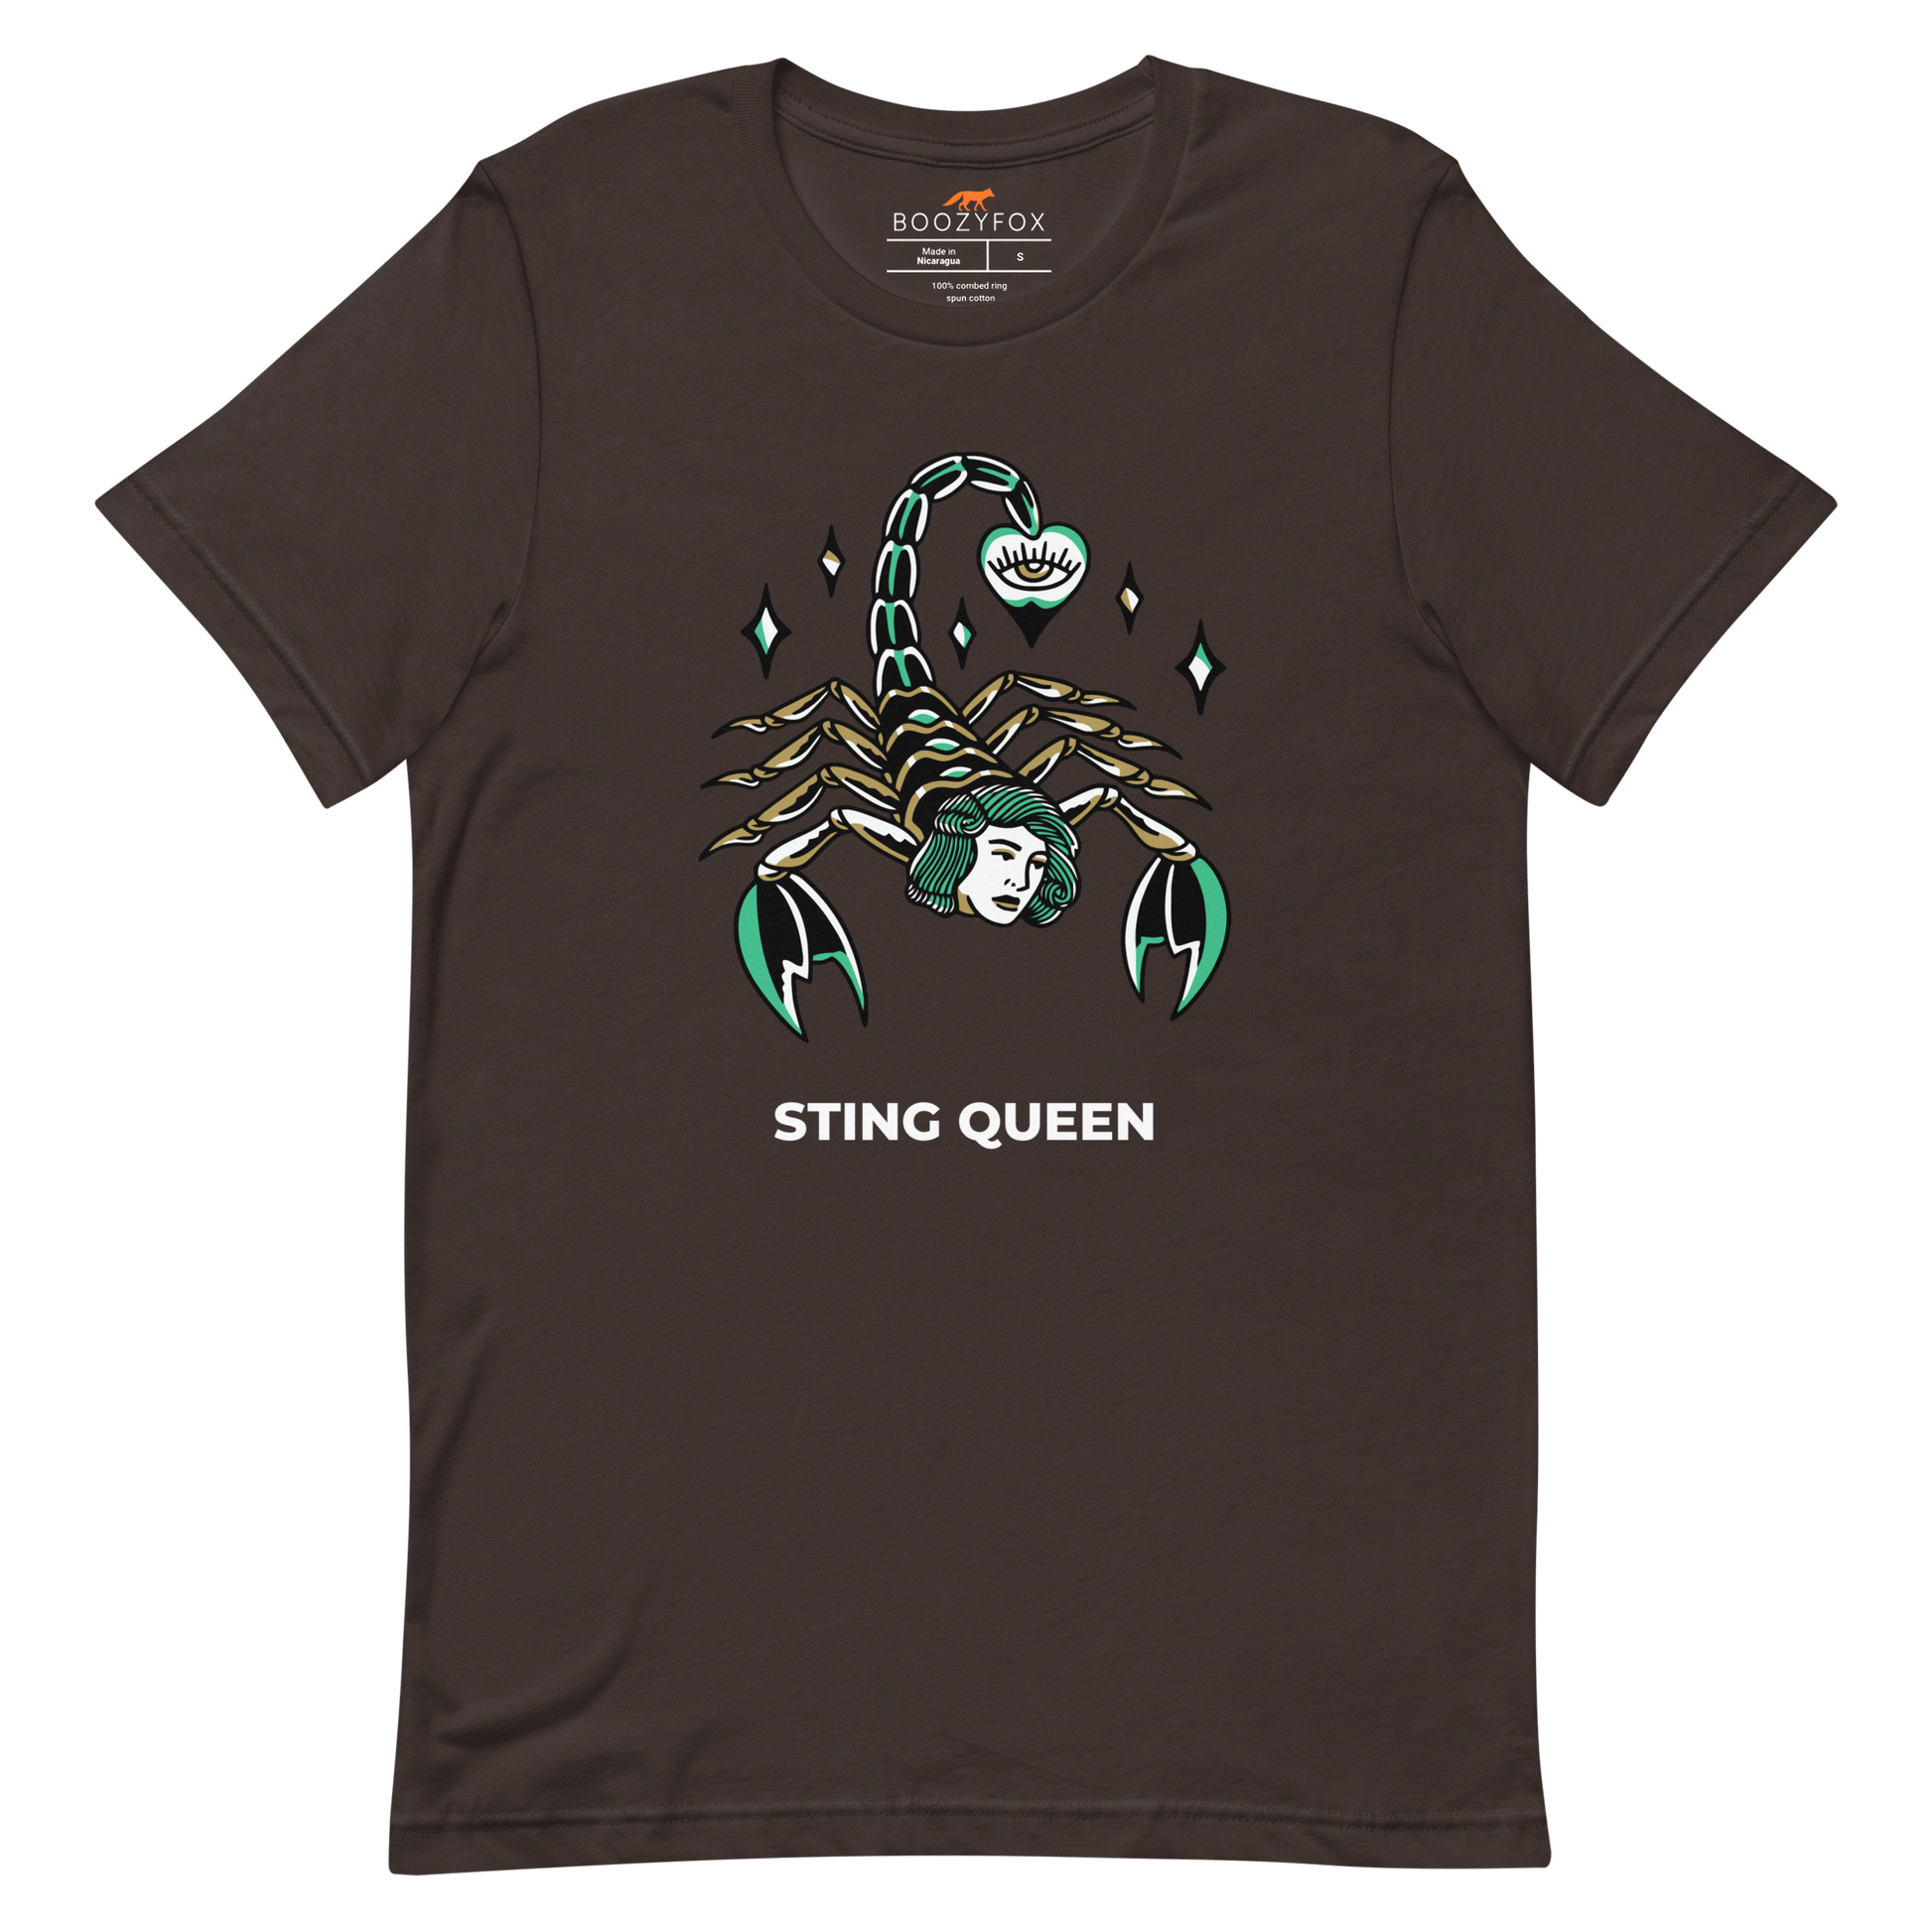 Brown Premium Scorpion Tee featuring The Sting Queen graphic on the chest - Cool Graphic Scorpion Tees - Boozy Fox